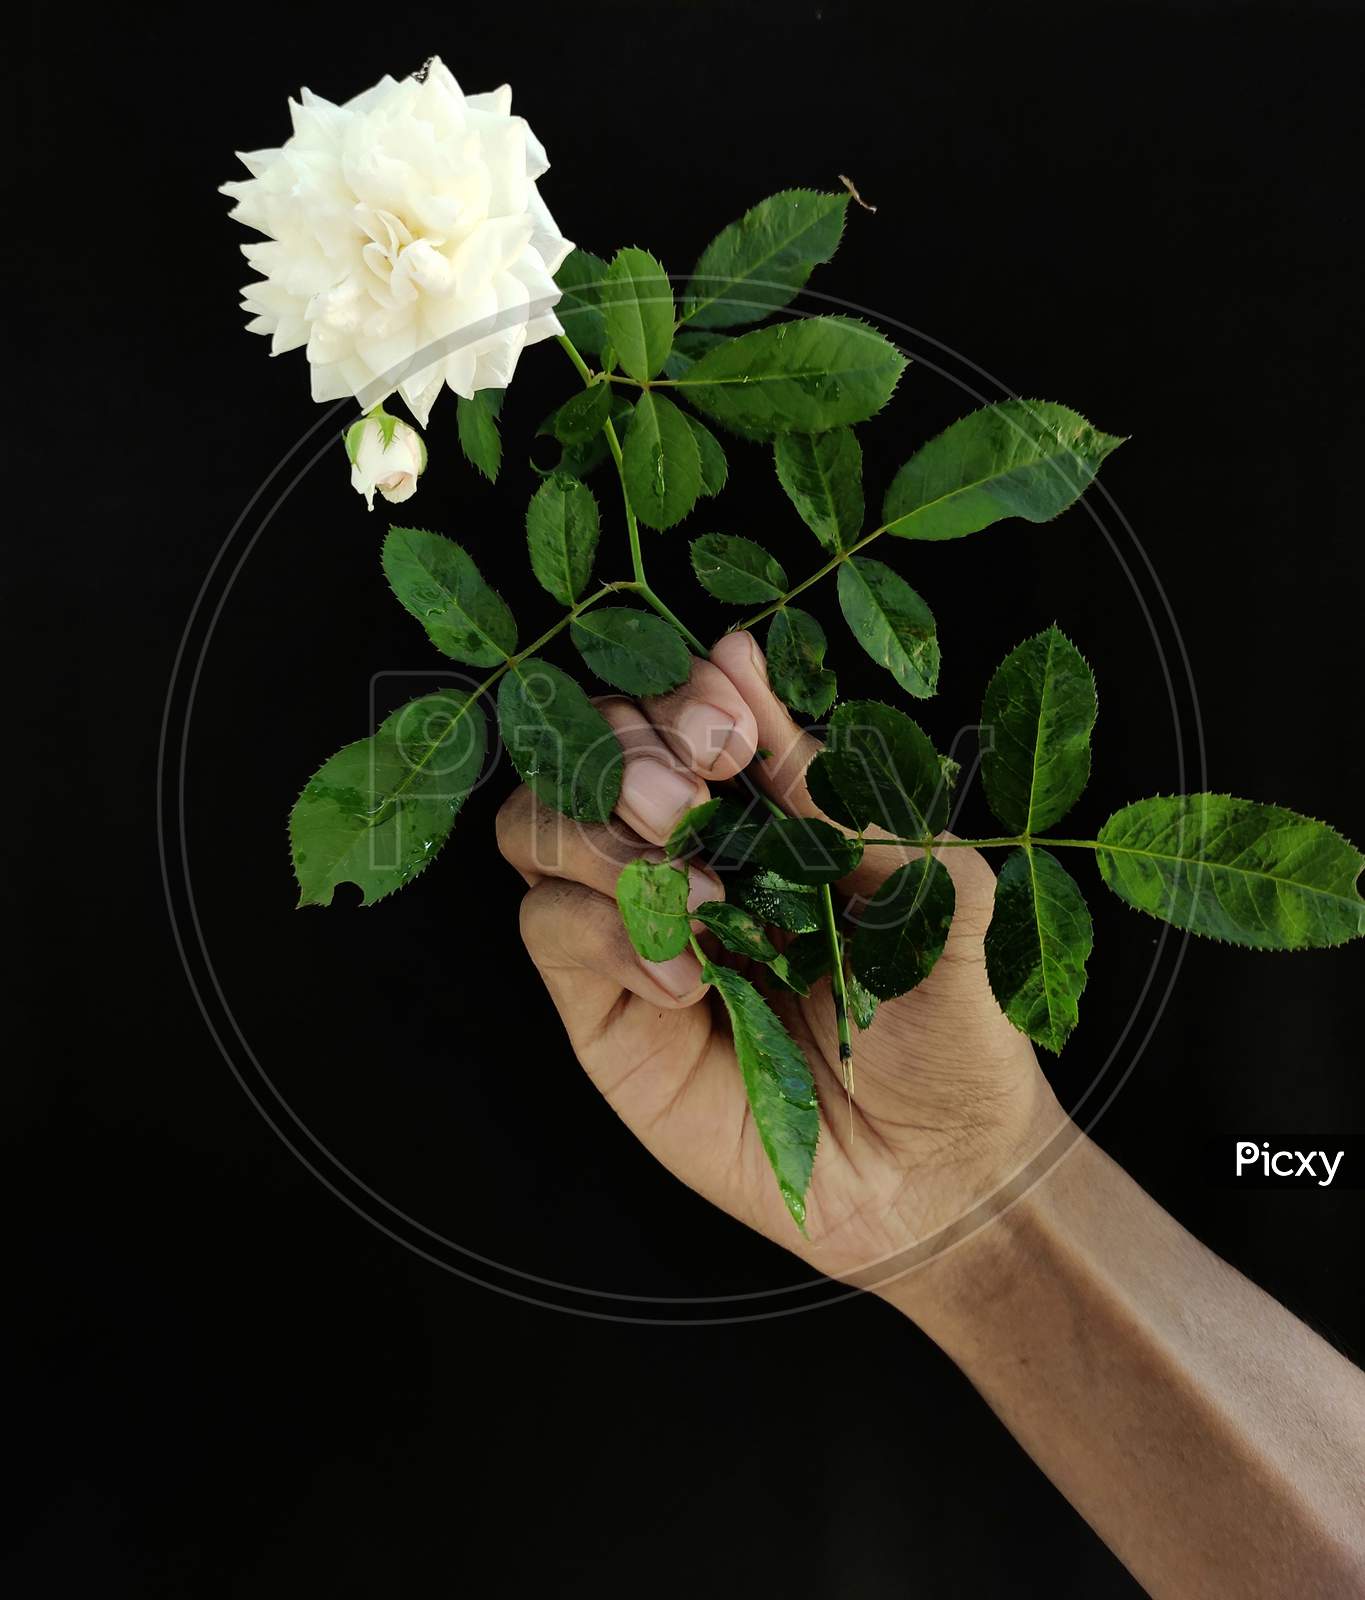 White rose in hand on black background